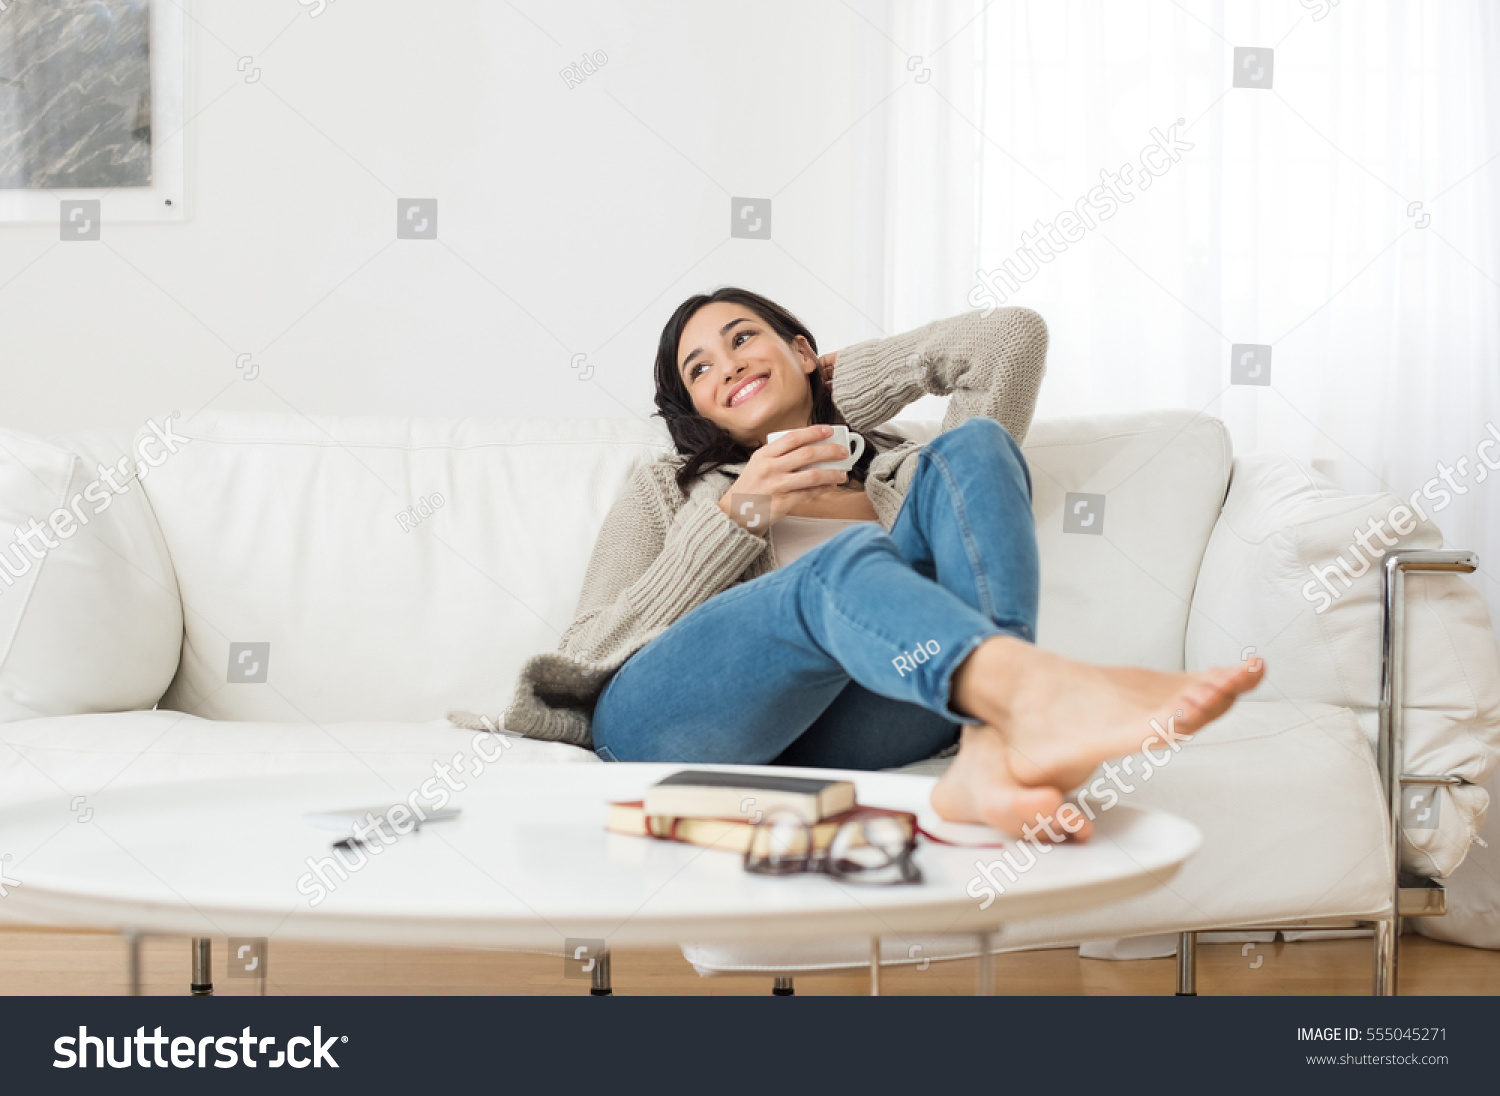 Young smiling woman sitting on sofa and looking up while drinking hot tea. Young brunette woman thinking at home in a leisure time. Happy girl relaxing at home on a bright winter morning. #555045271